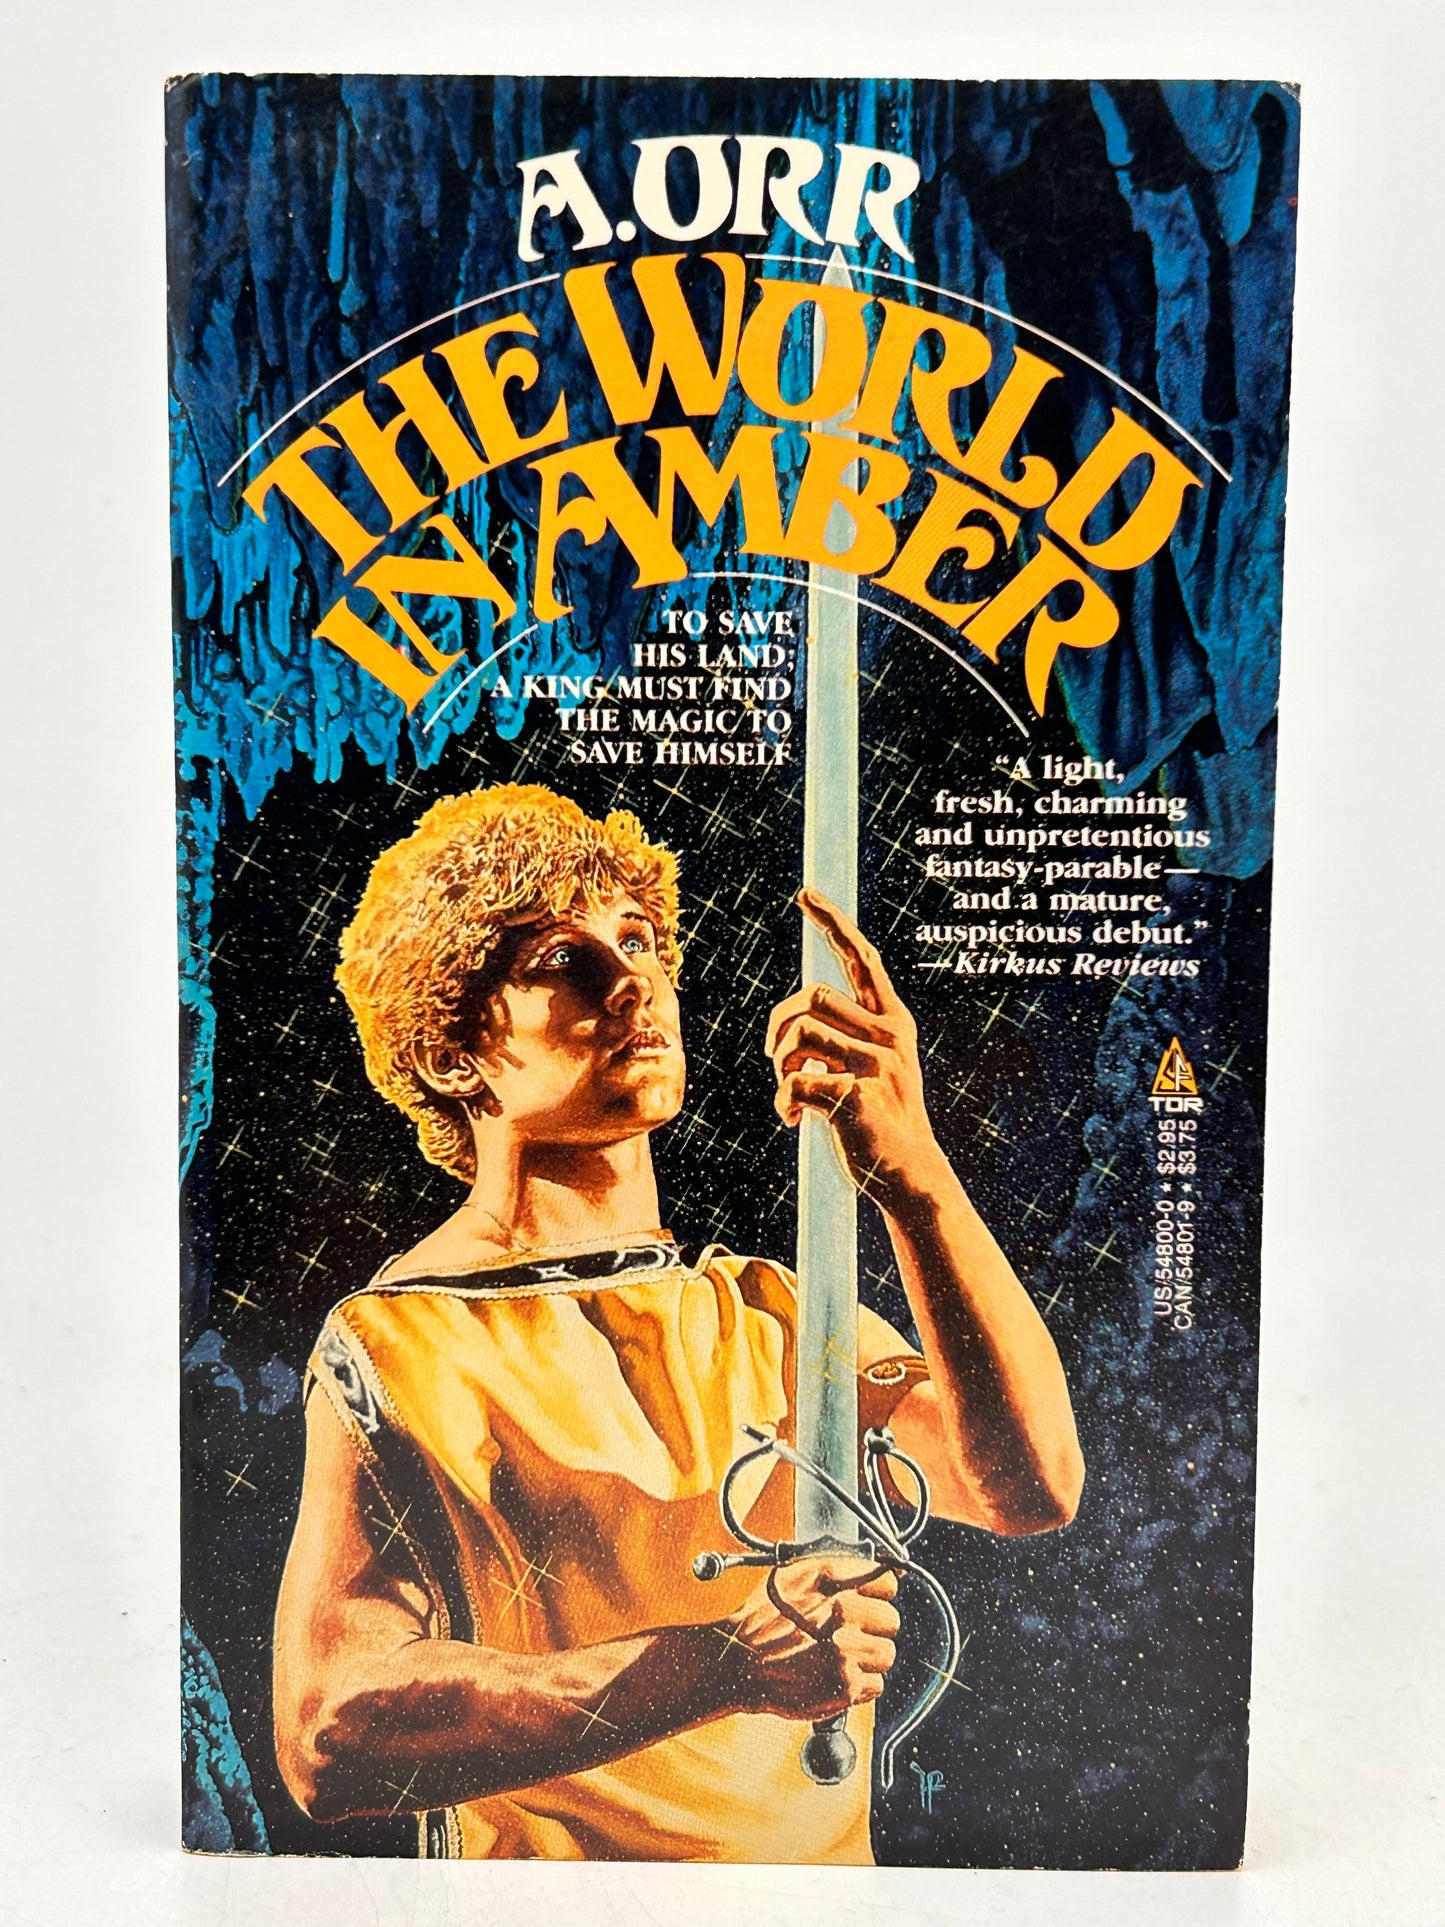 World In Amber TOR Paperback A. Orr SF04